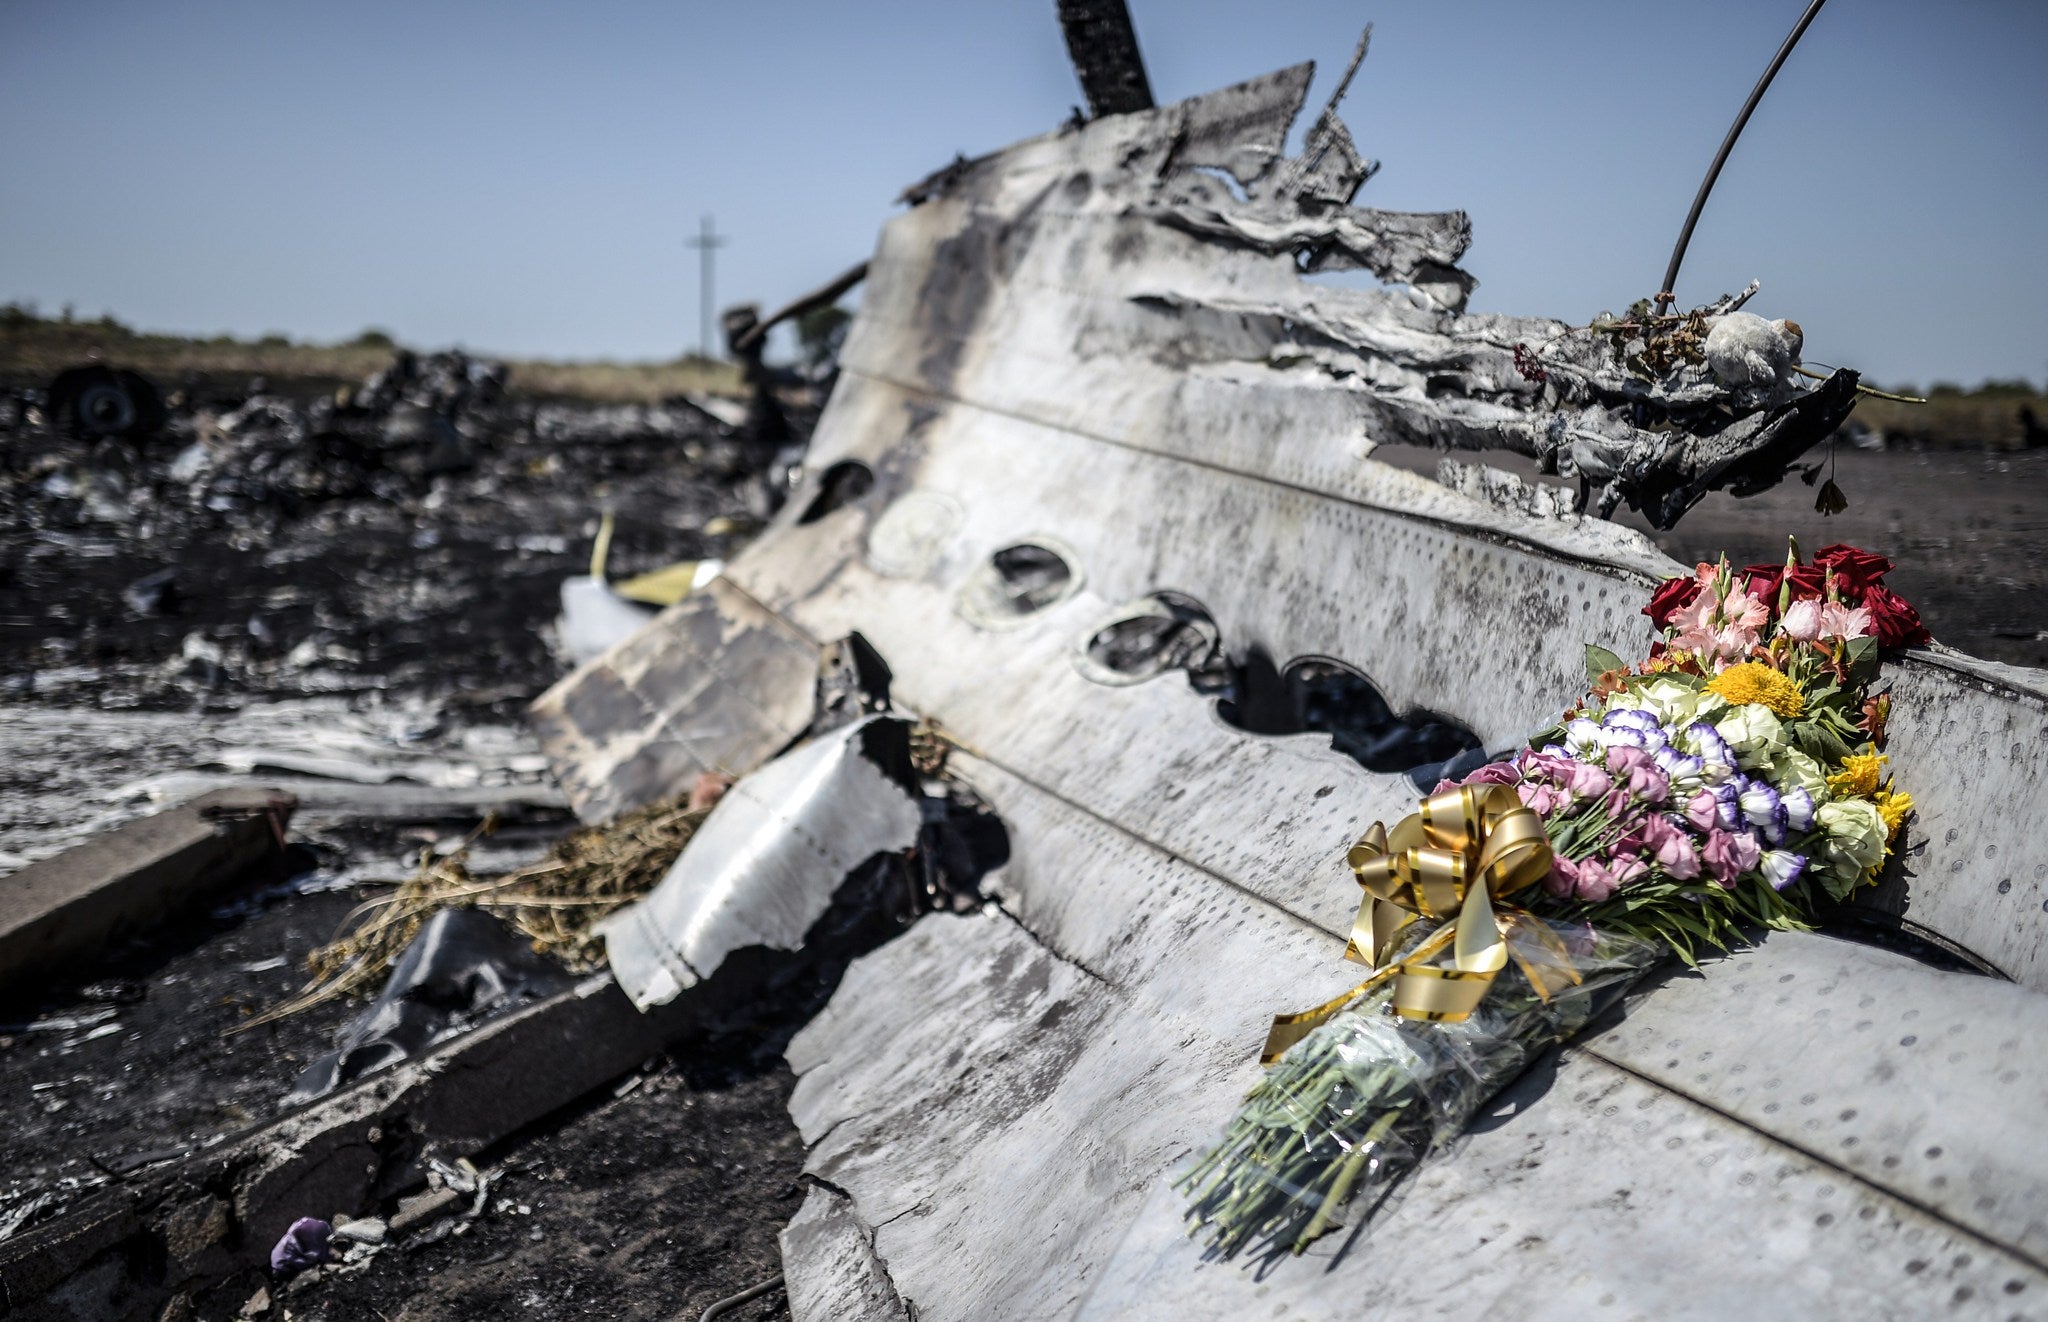 Australian and Dutch authorities are making a second attempt to reach the crash site of MH17